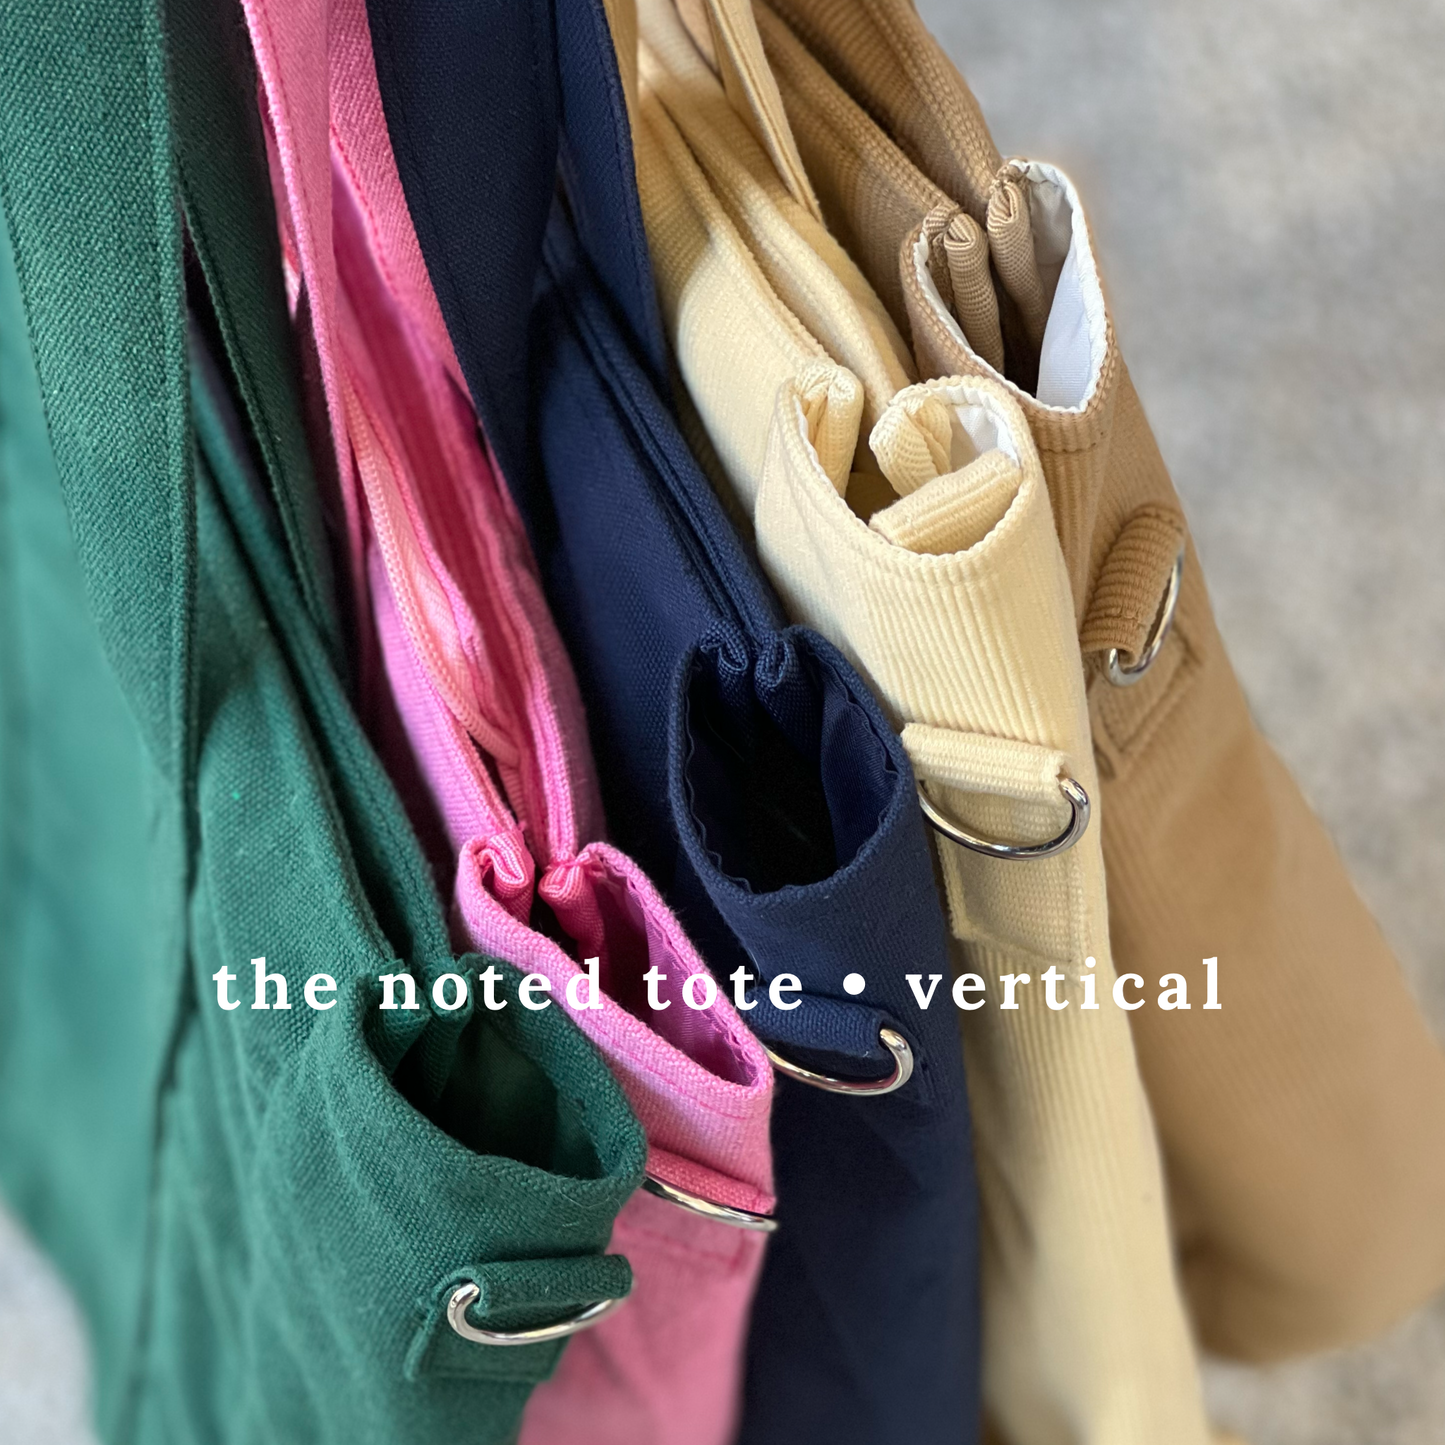 The Noted Tote - Vertical